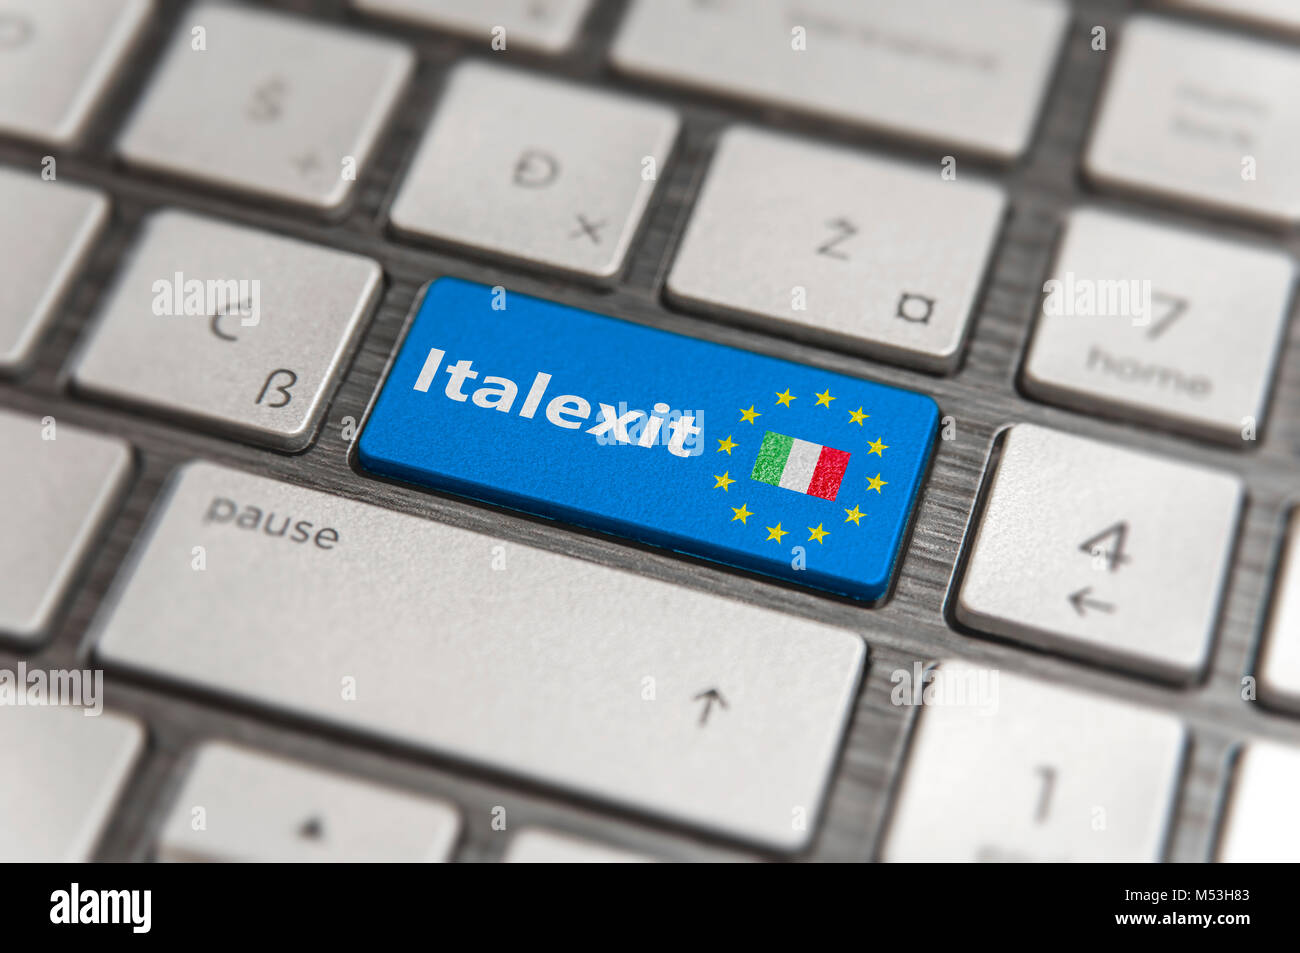 Blue key Enter Italy Italexit with EU keyboard button on modern text communication board Stock Photo